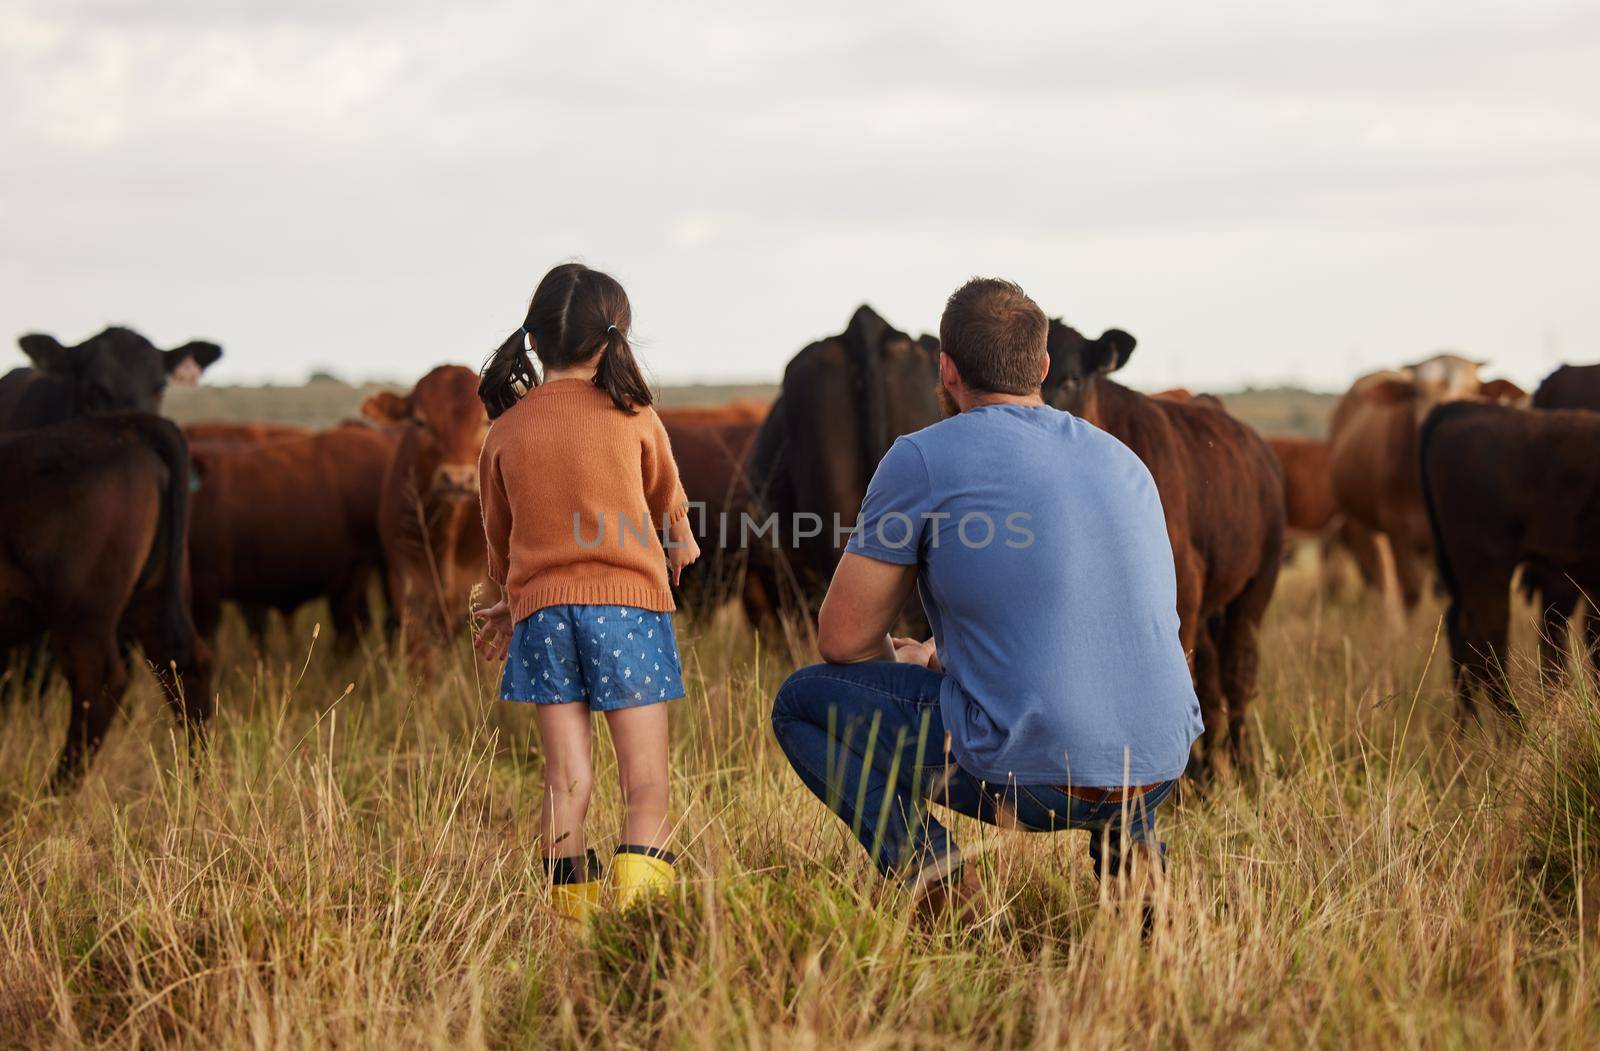 Father and daughter bonding at a cattle farm, having fun and learning how to care for livestock. Parent and child enjoying outdoors in nature, looking at cows and talking. Farmer showing kid animals.